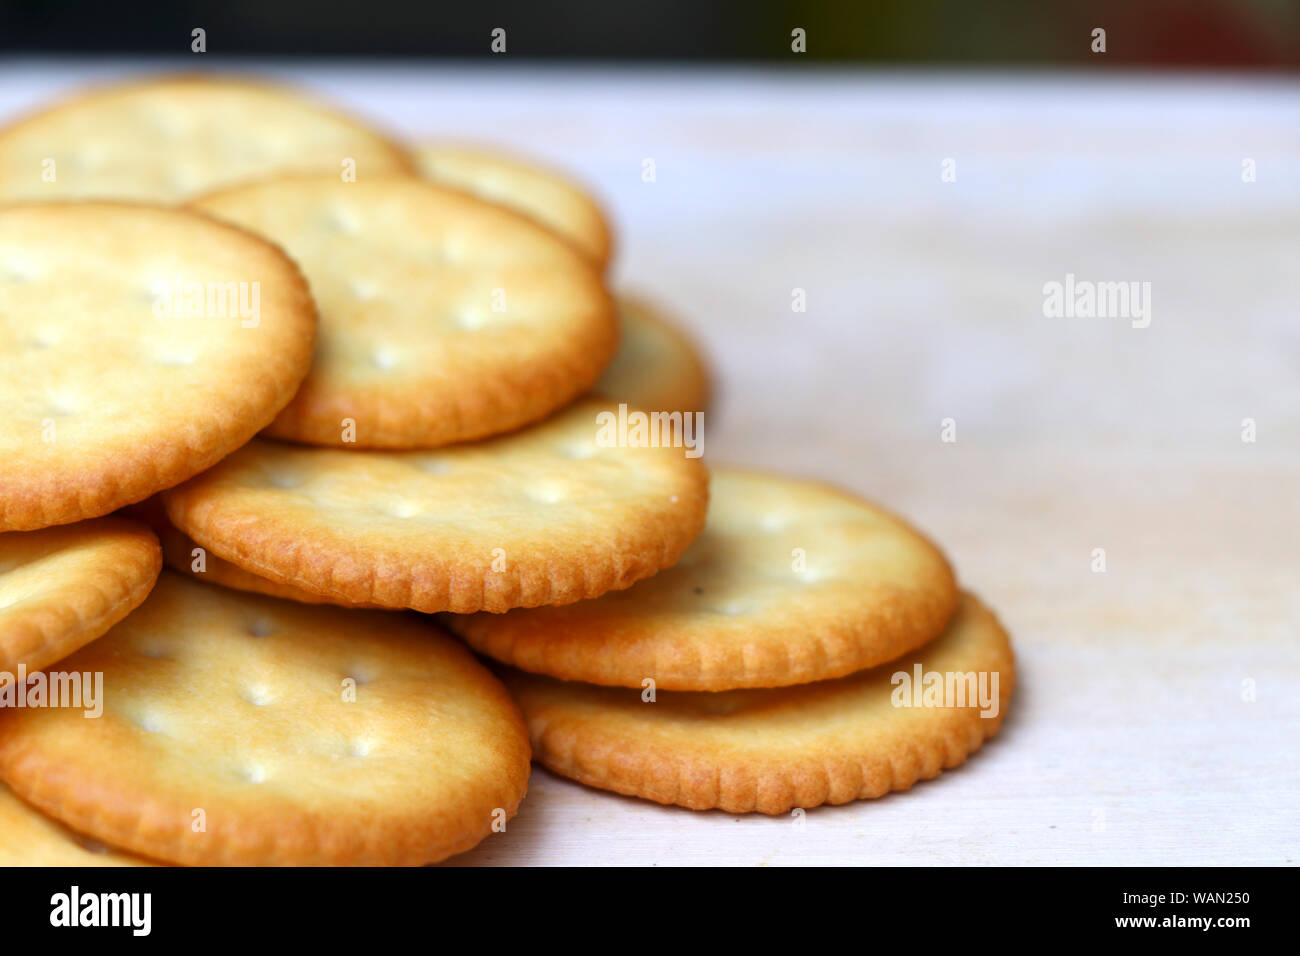 Biscuits are stacked on the wooden table with selective focus. Stock Photo